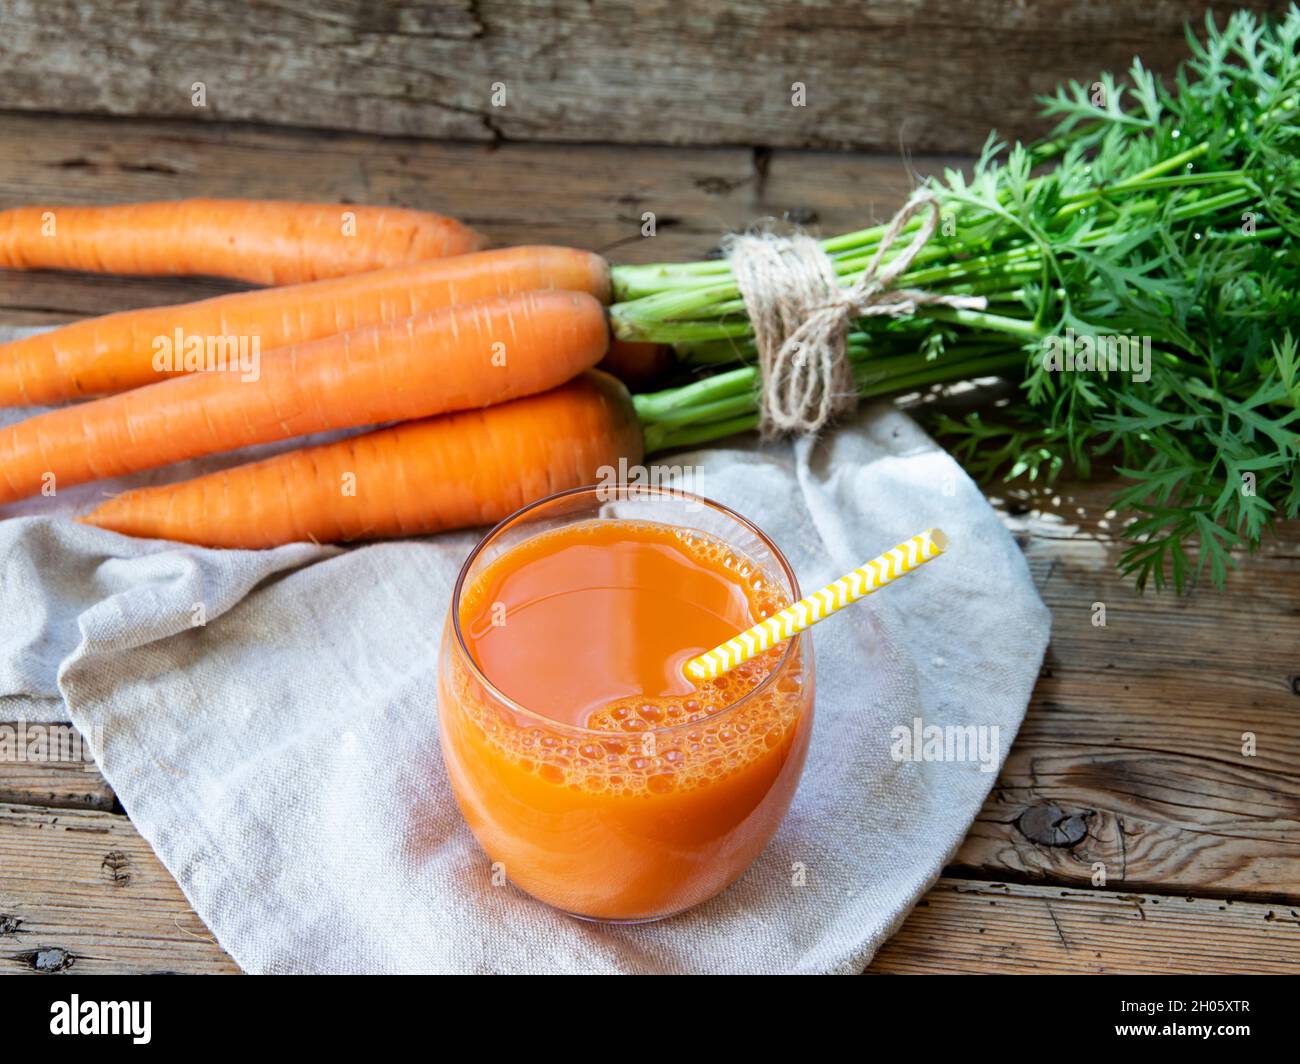 Fresh squeezed carrot juice in a glass on a wooden surface, rustic style  Healthy eating, detox, dieting and vegetarian concept. Stock Photo